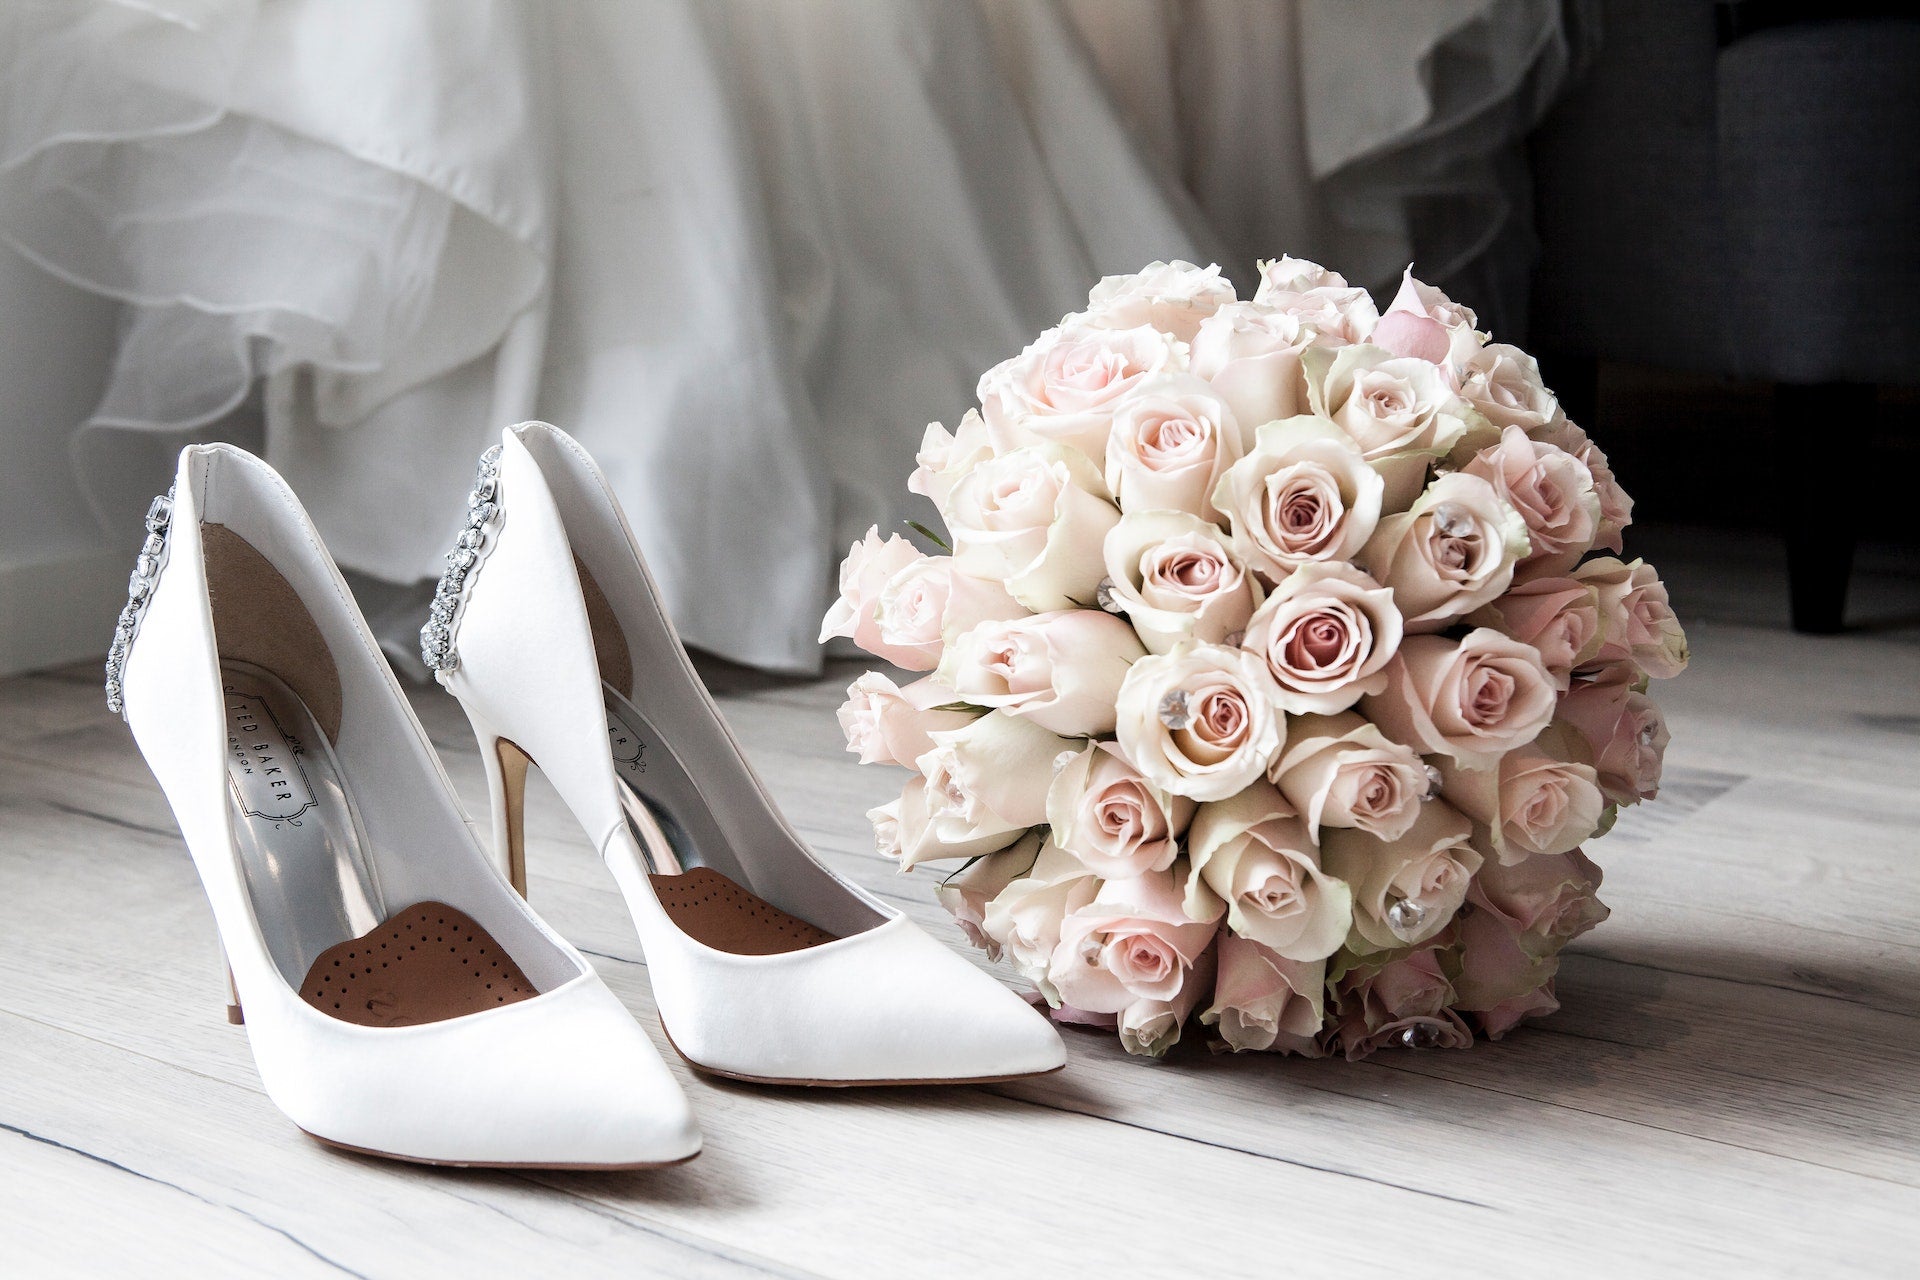 Weddings on a Budget: How a Wedding Stylist Can Help You Save Big on Your Big Day